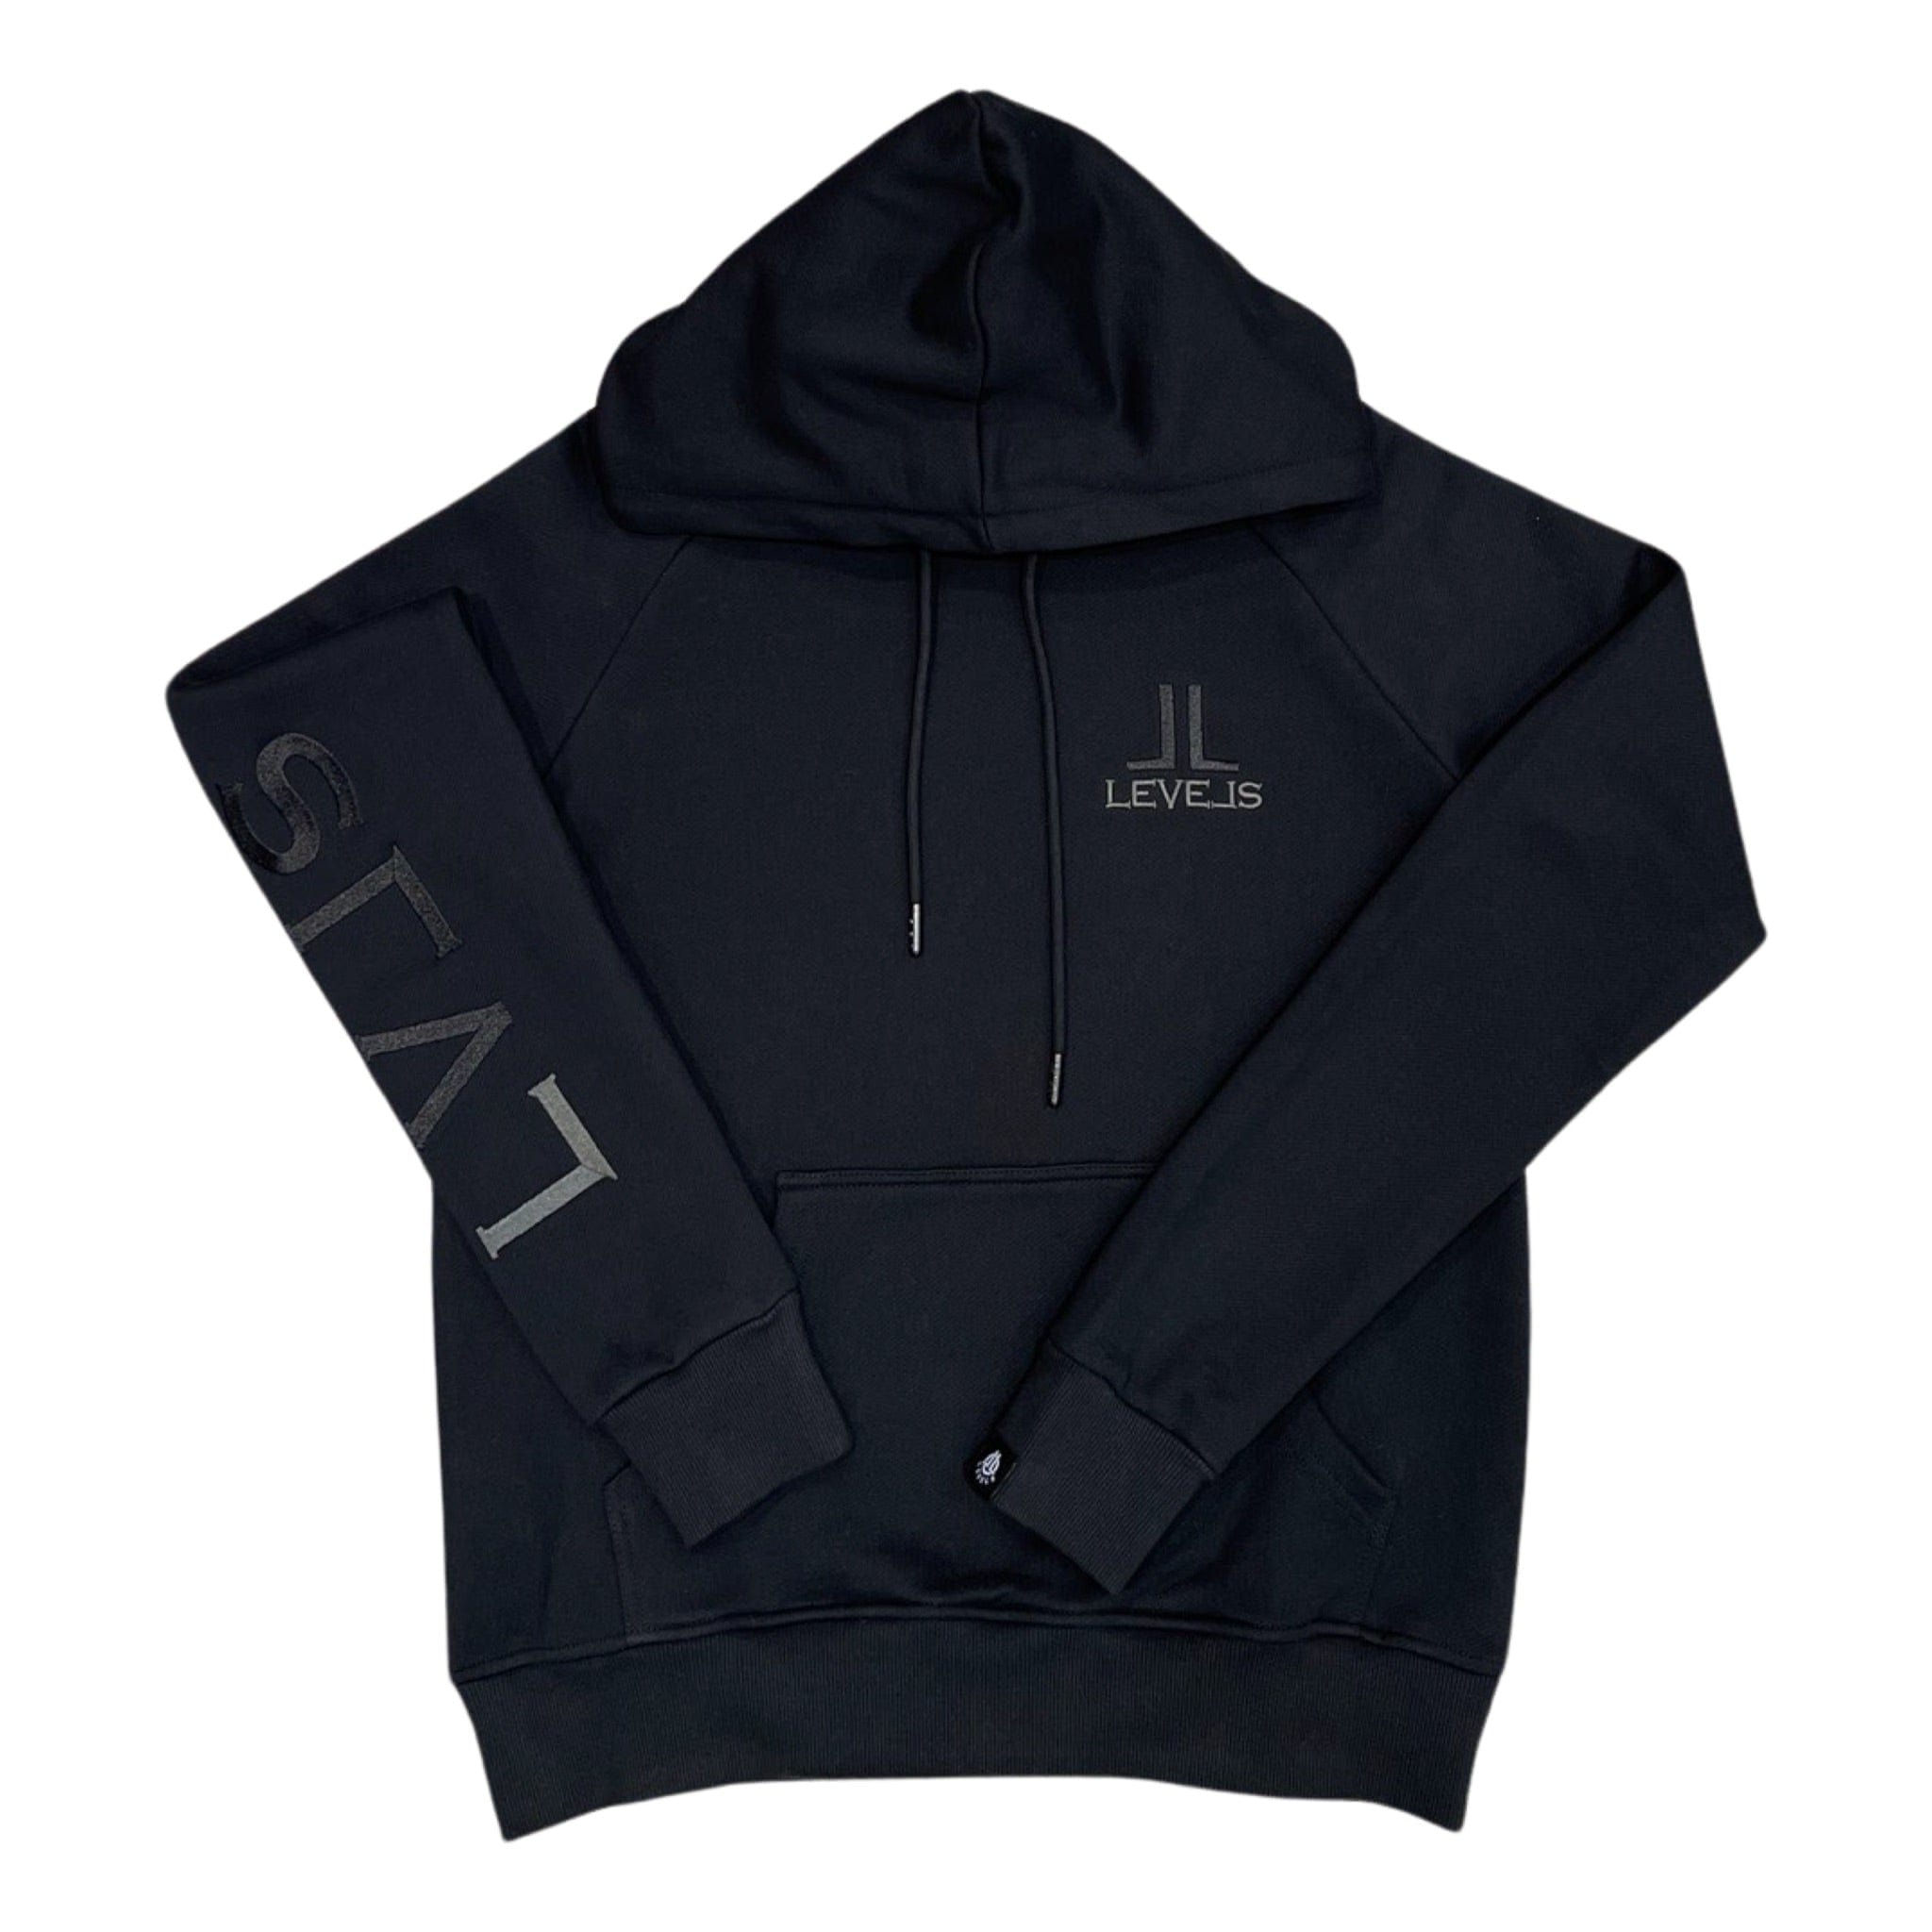 LEVELS, LLC Apparel & Accessories LUXE LVLS EMBROIDERED HOODIE (ONYX)